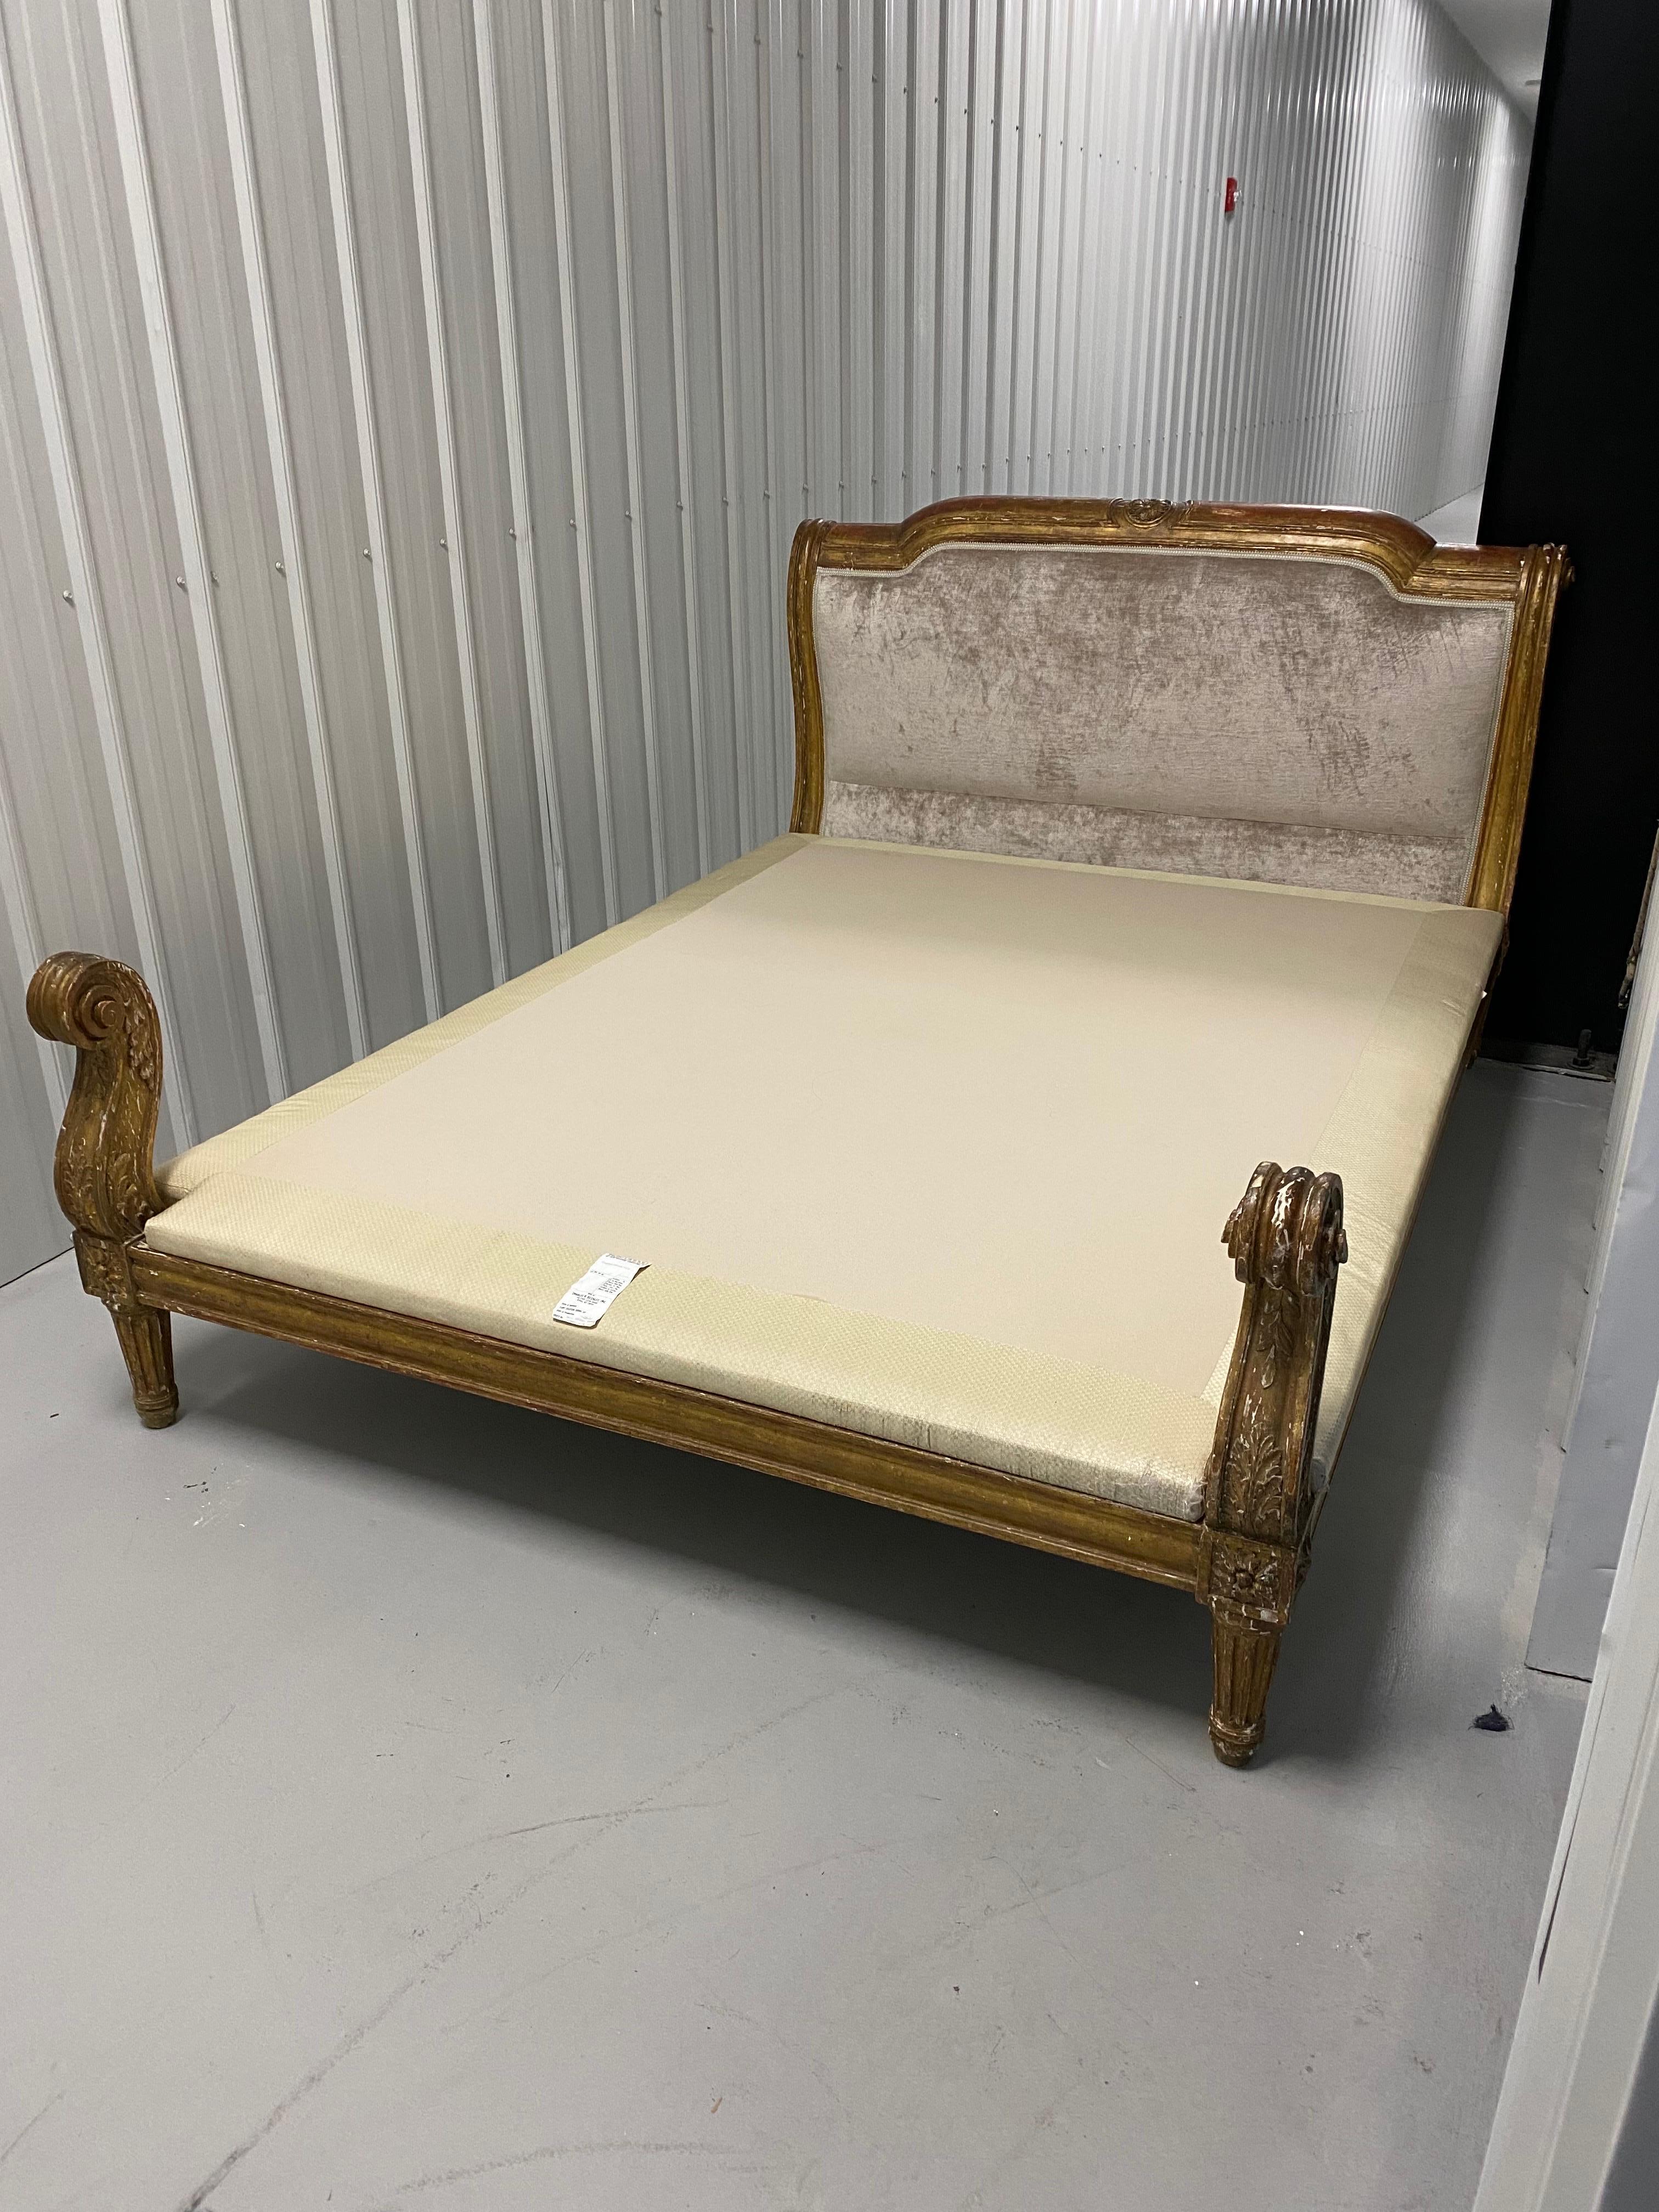 19th C. French Gilt-Wood Customized Queen Sleigh Bed with Mattress, David Easton For Sale 9